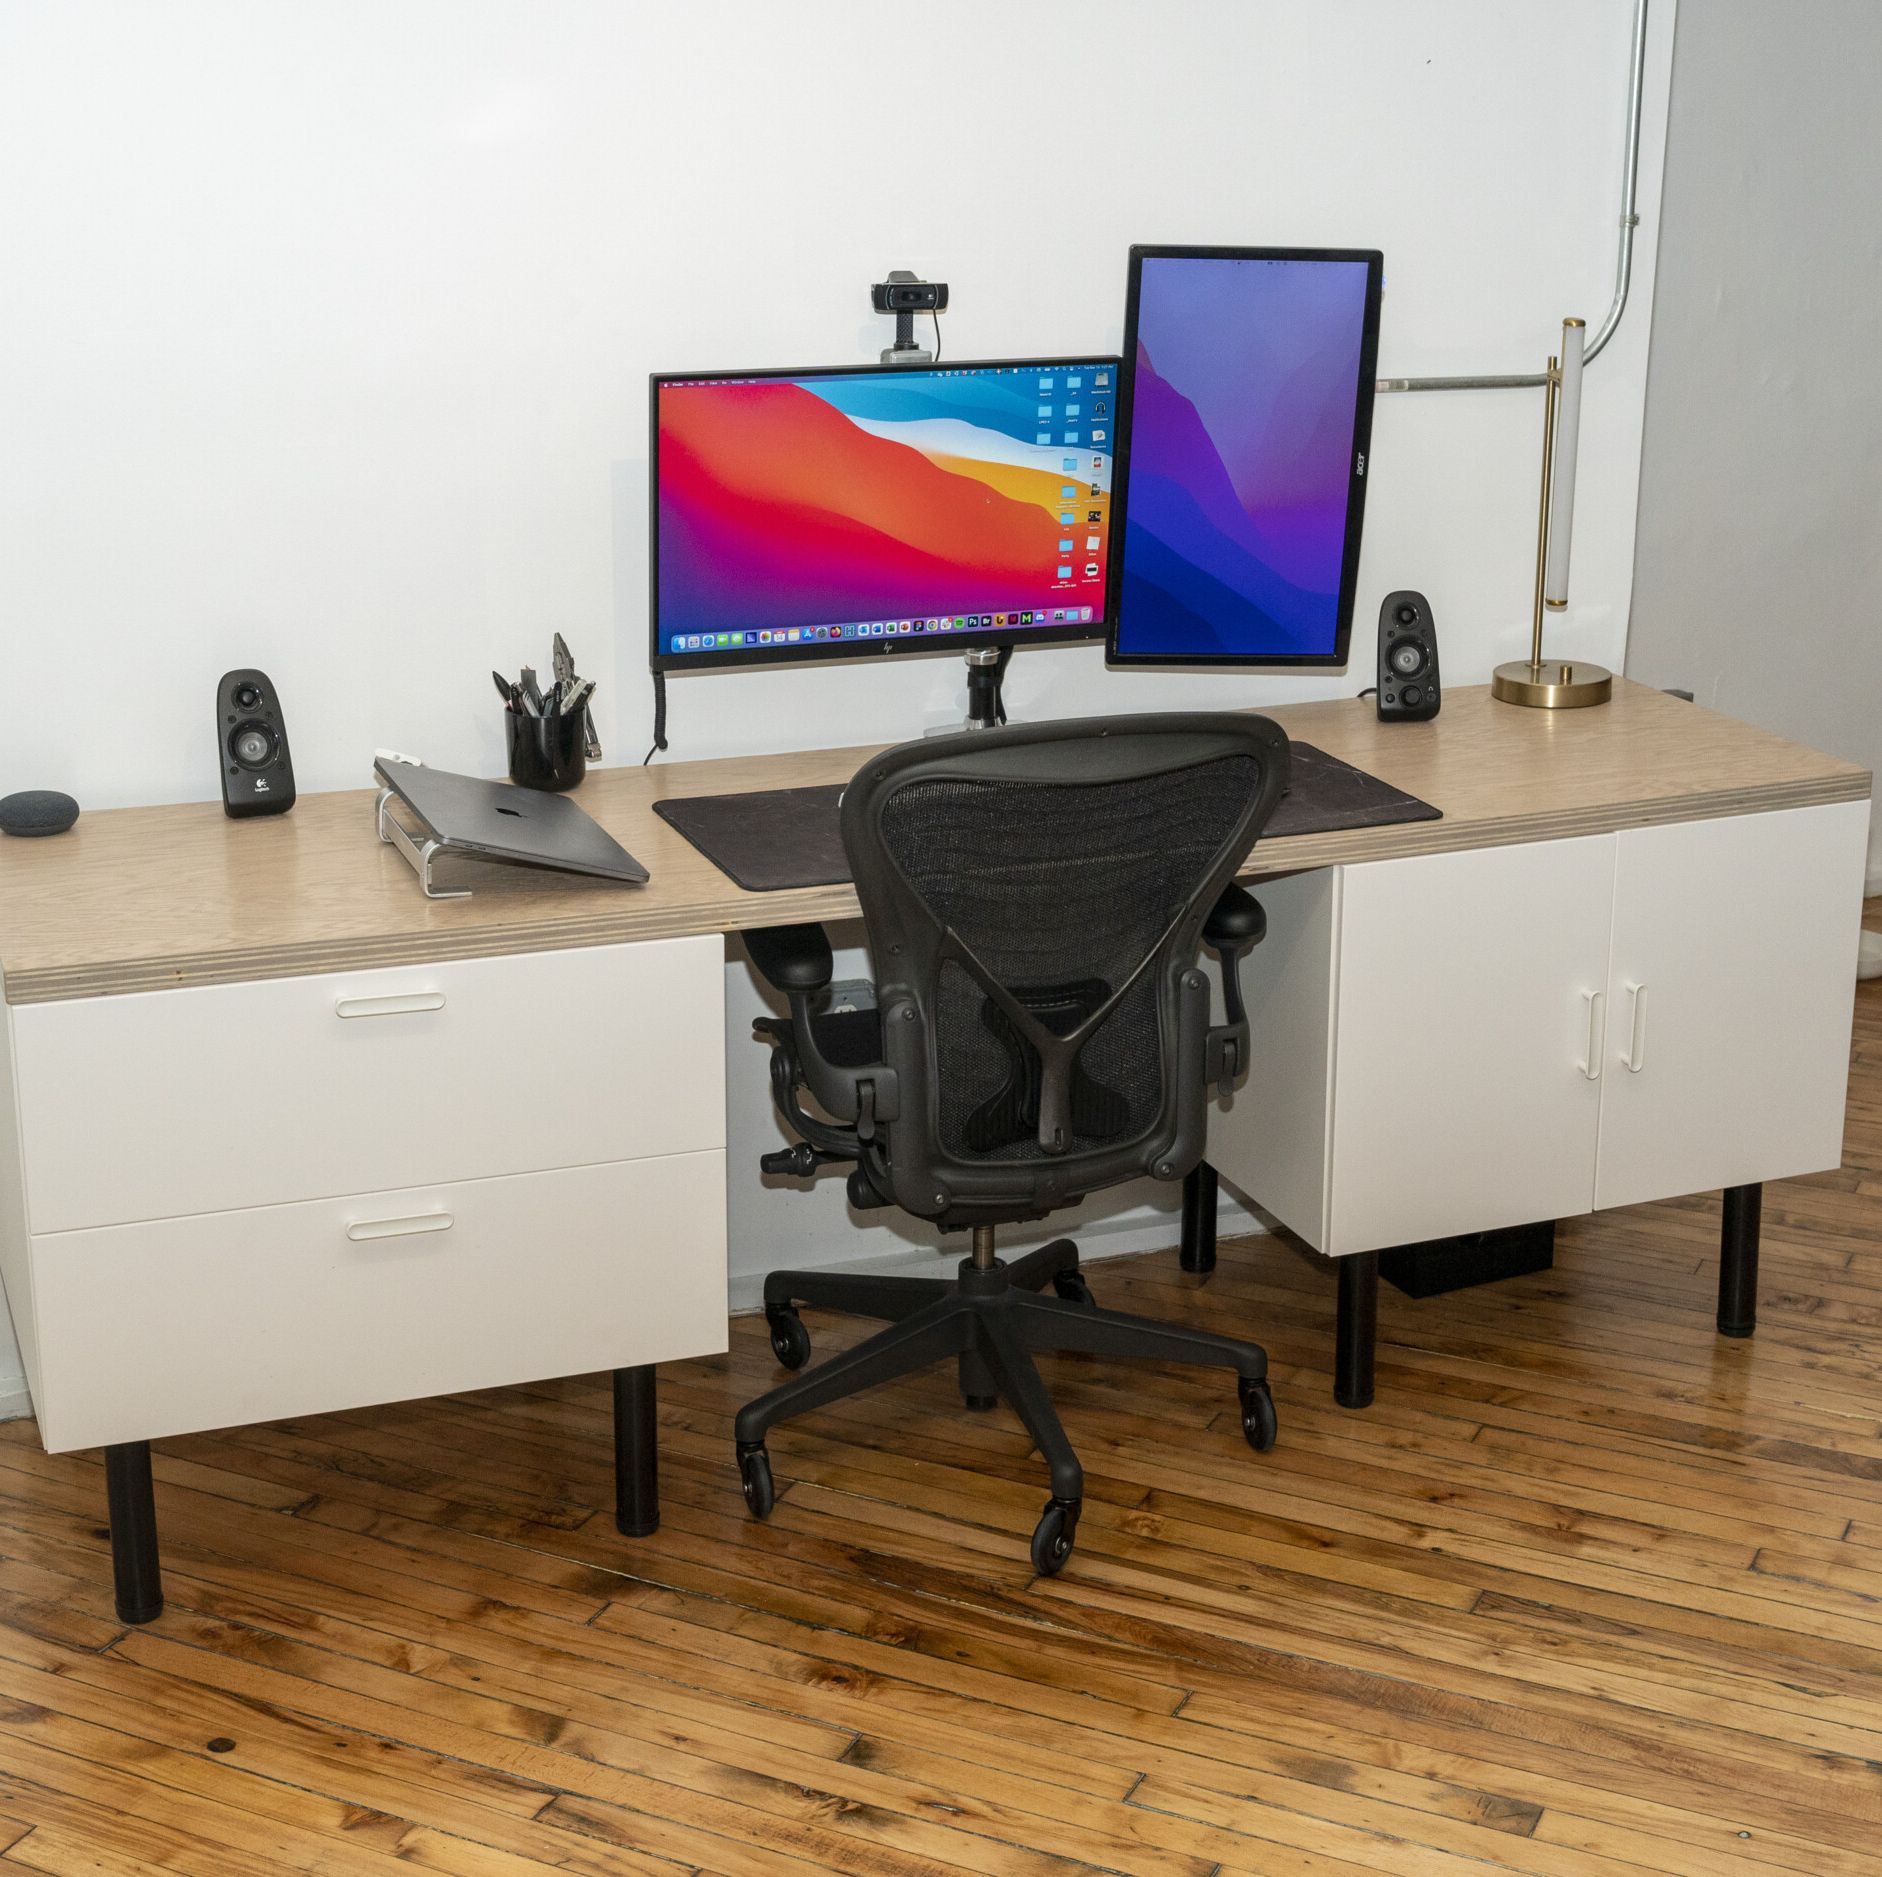 How to Build a Custom Computer Desk With Ikea Cabinets and Plywood